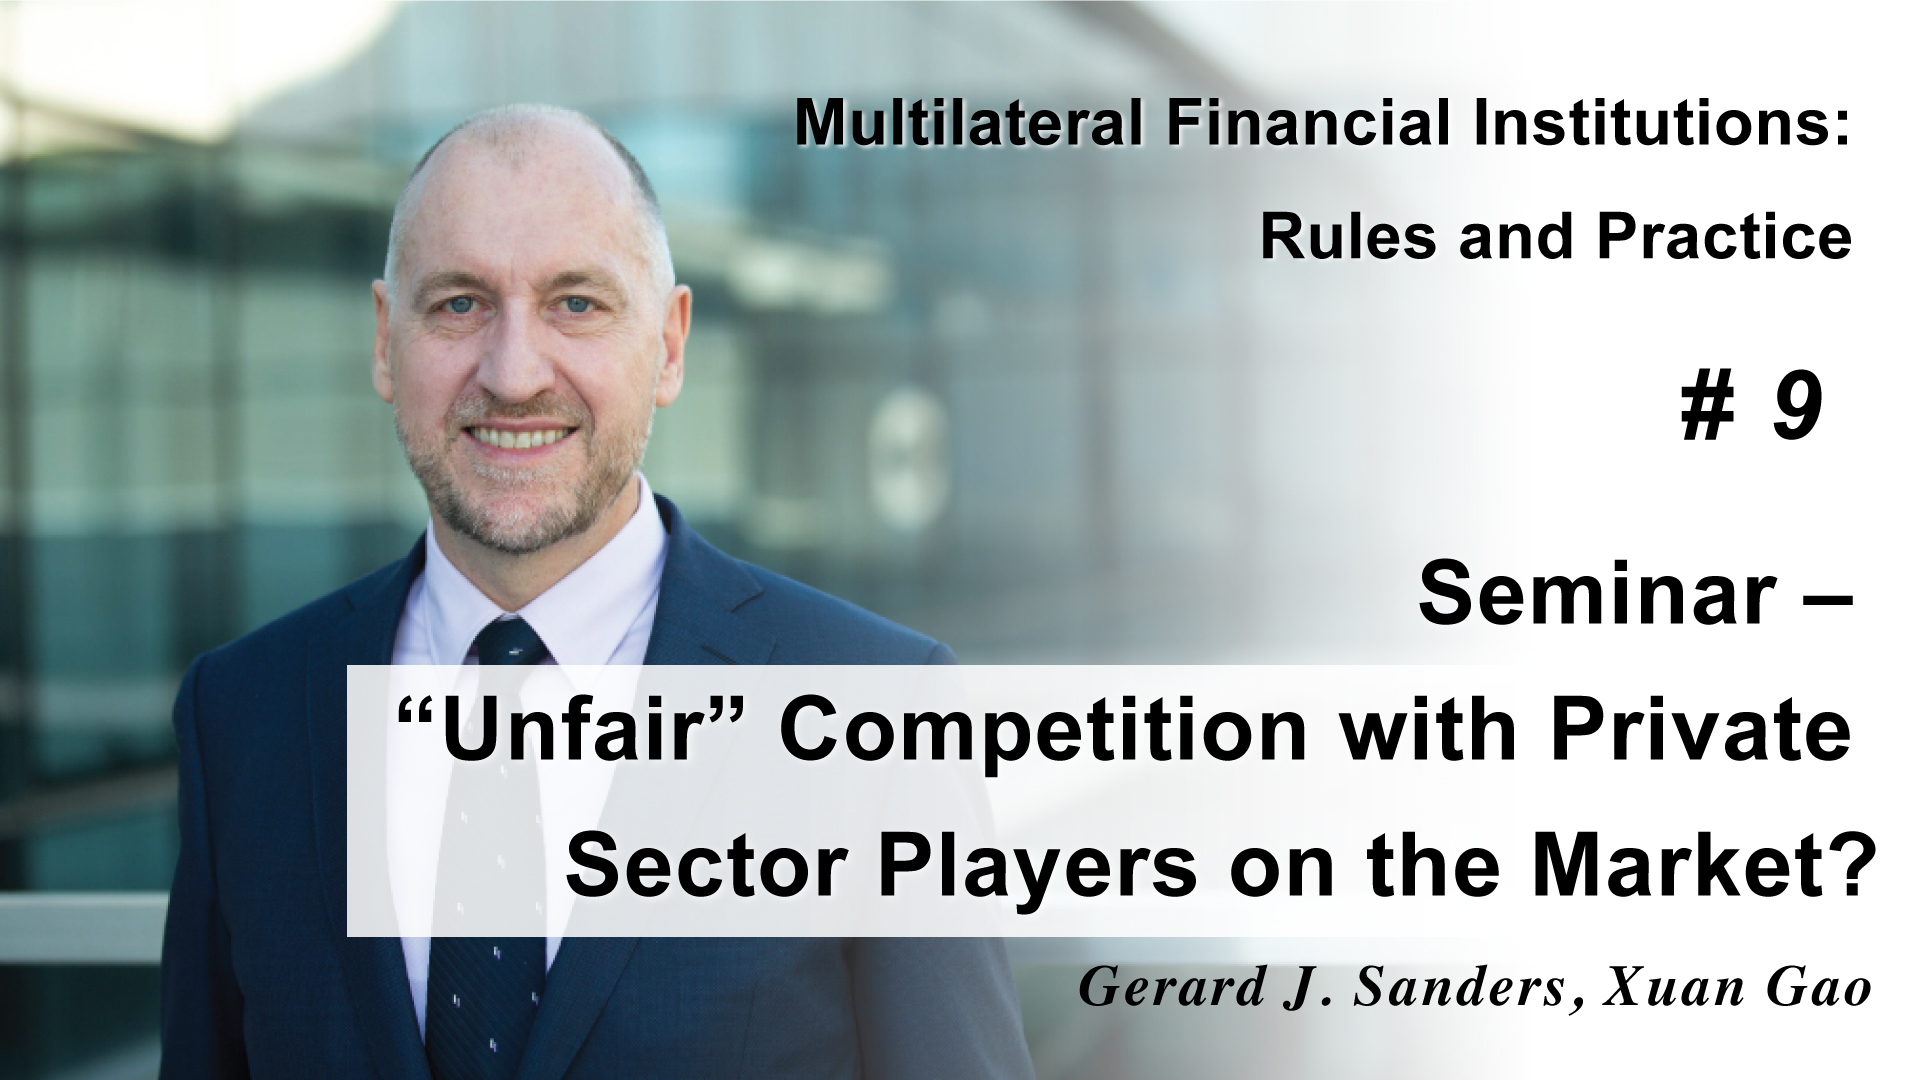 Seminar - “Unfair” Competition with Private Sector Players on the Market? 